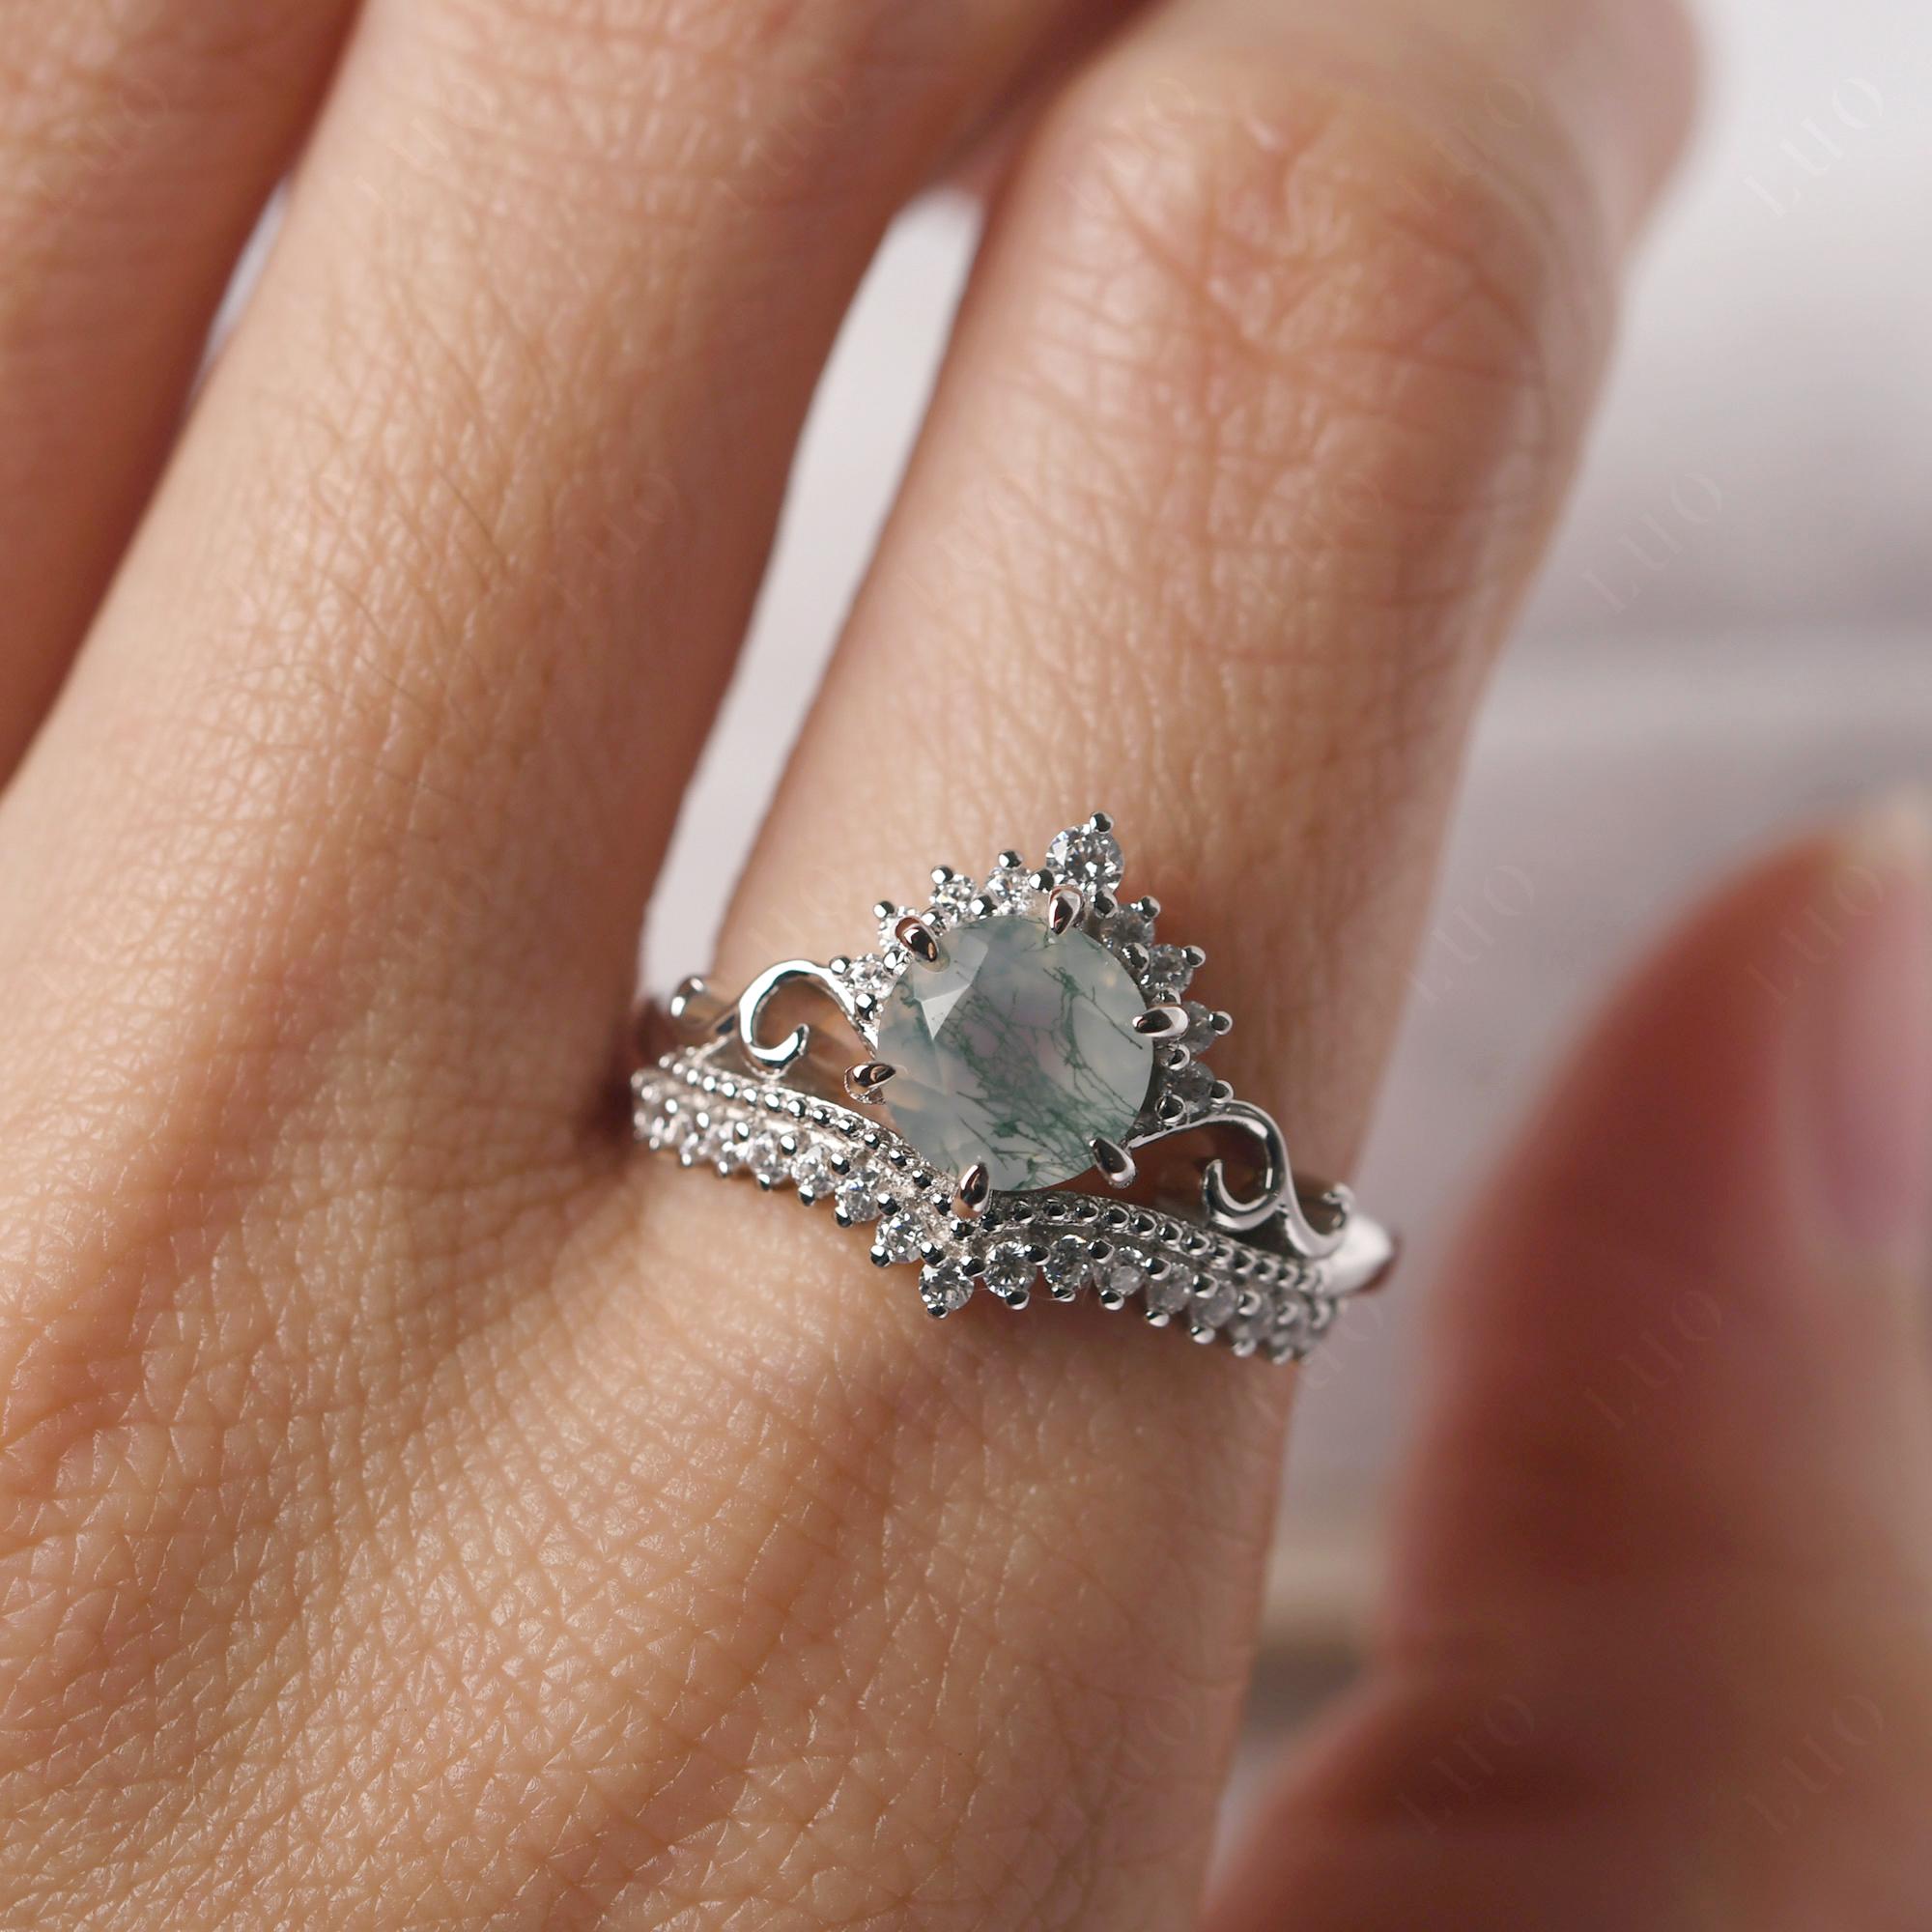 Vintage Moss Agate Cocktail Ring - LUO Jewelry